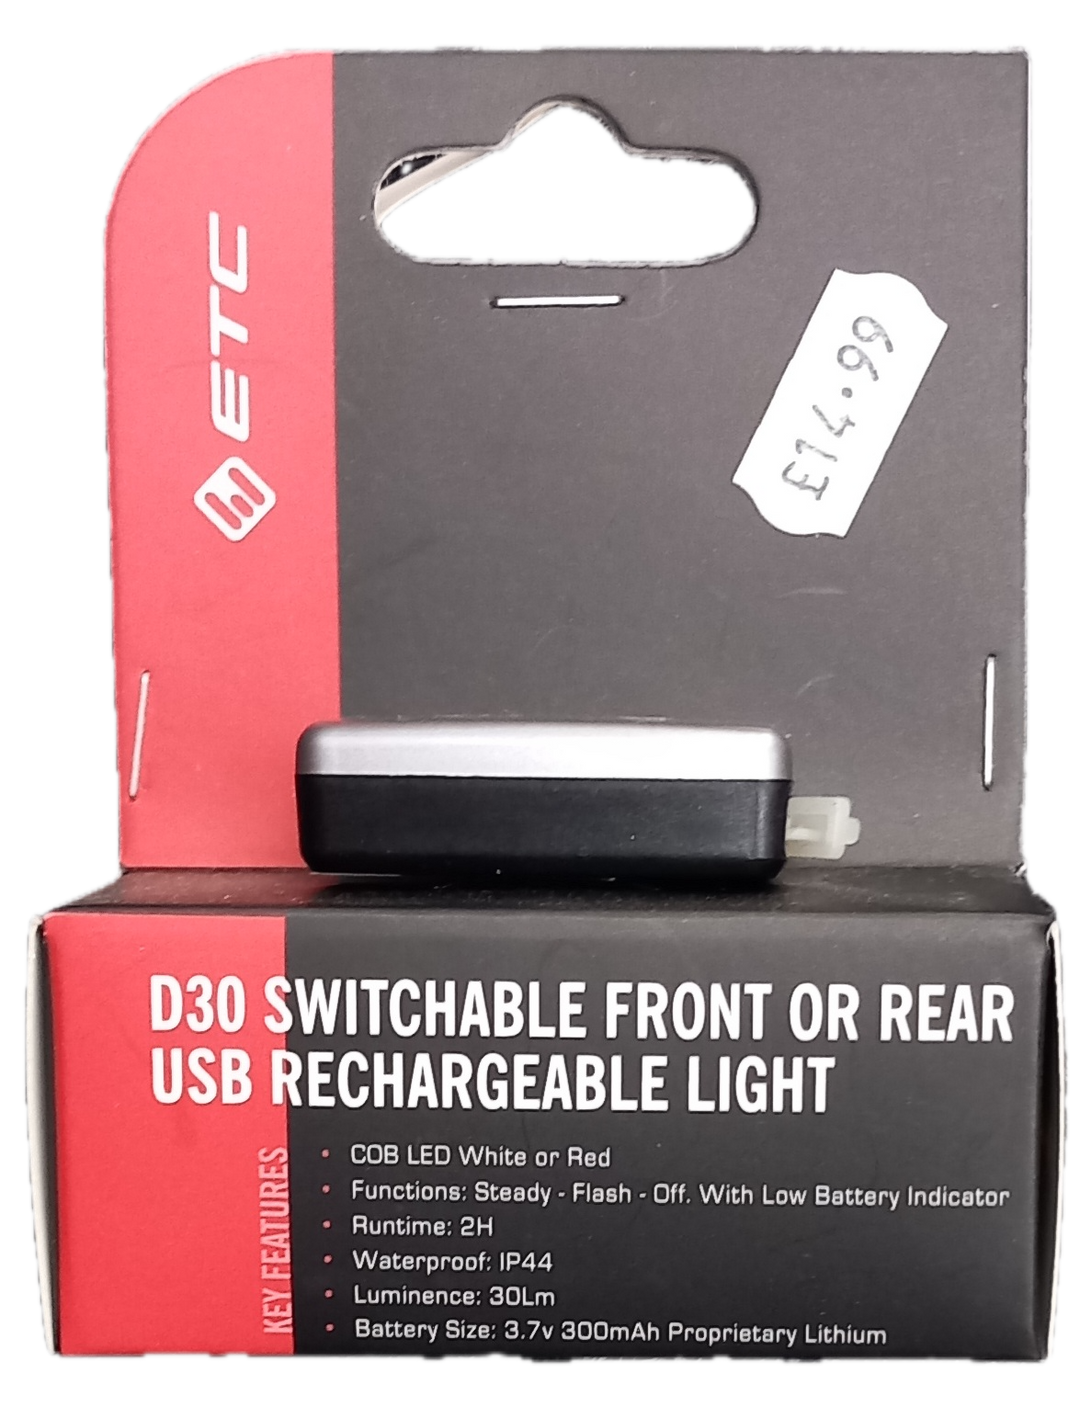 ETC D30 Switchable Front or Rear USB Rechargeable Light